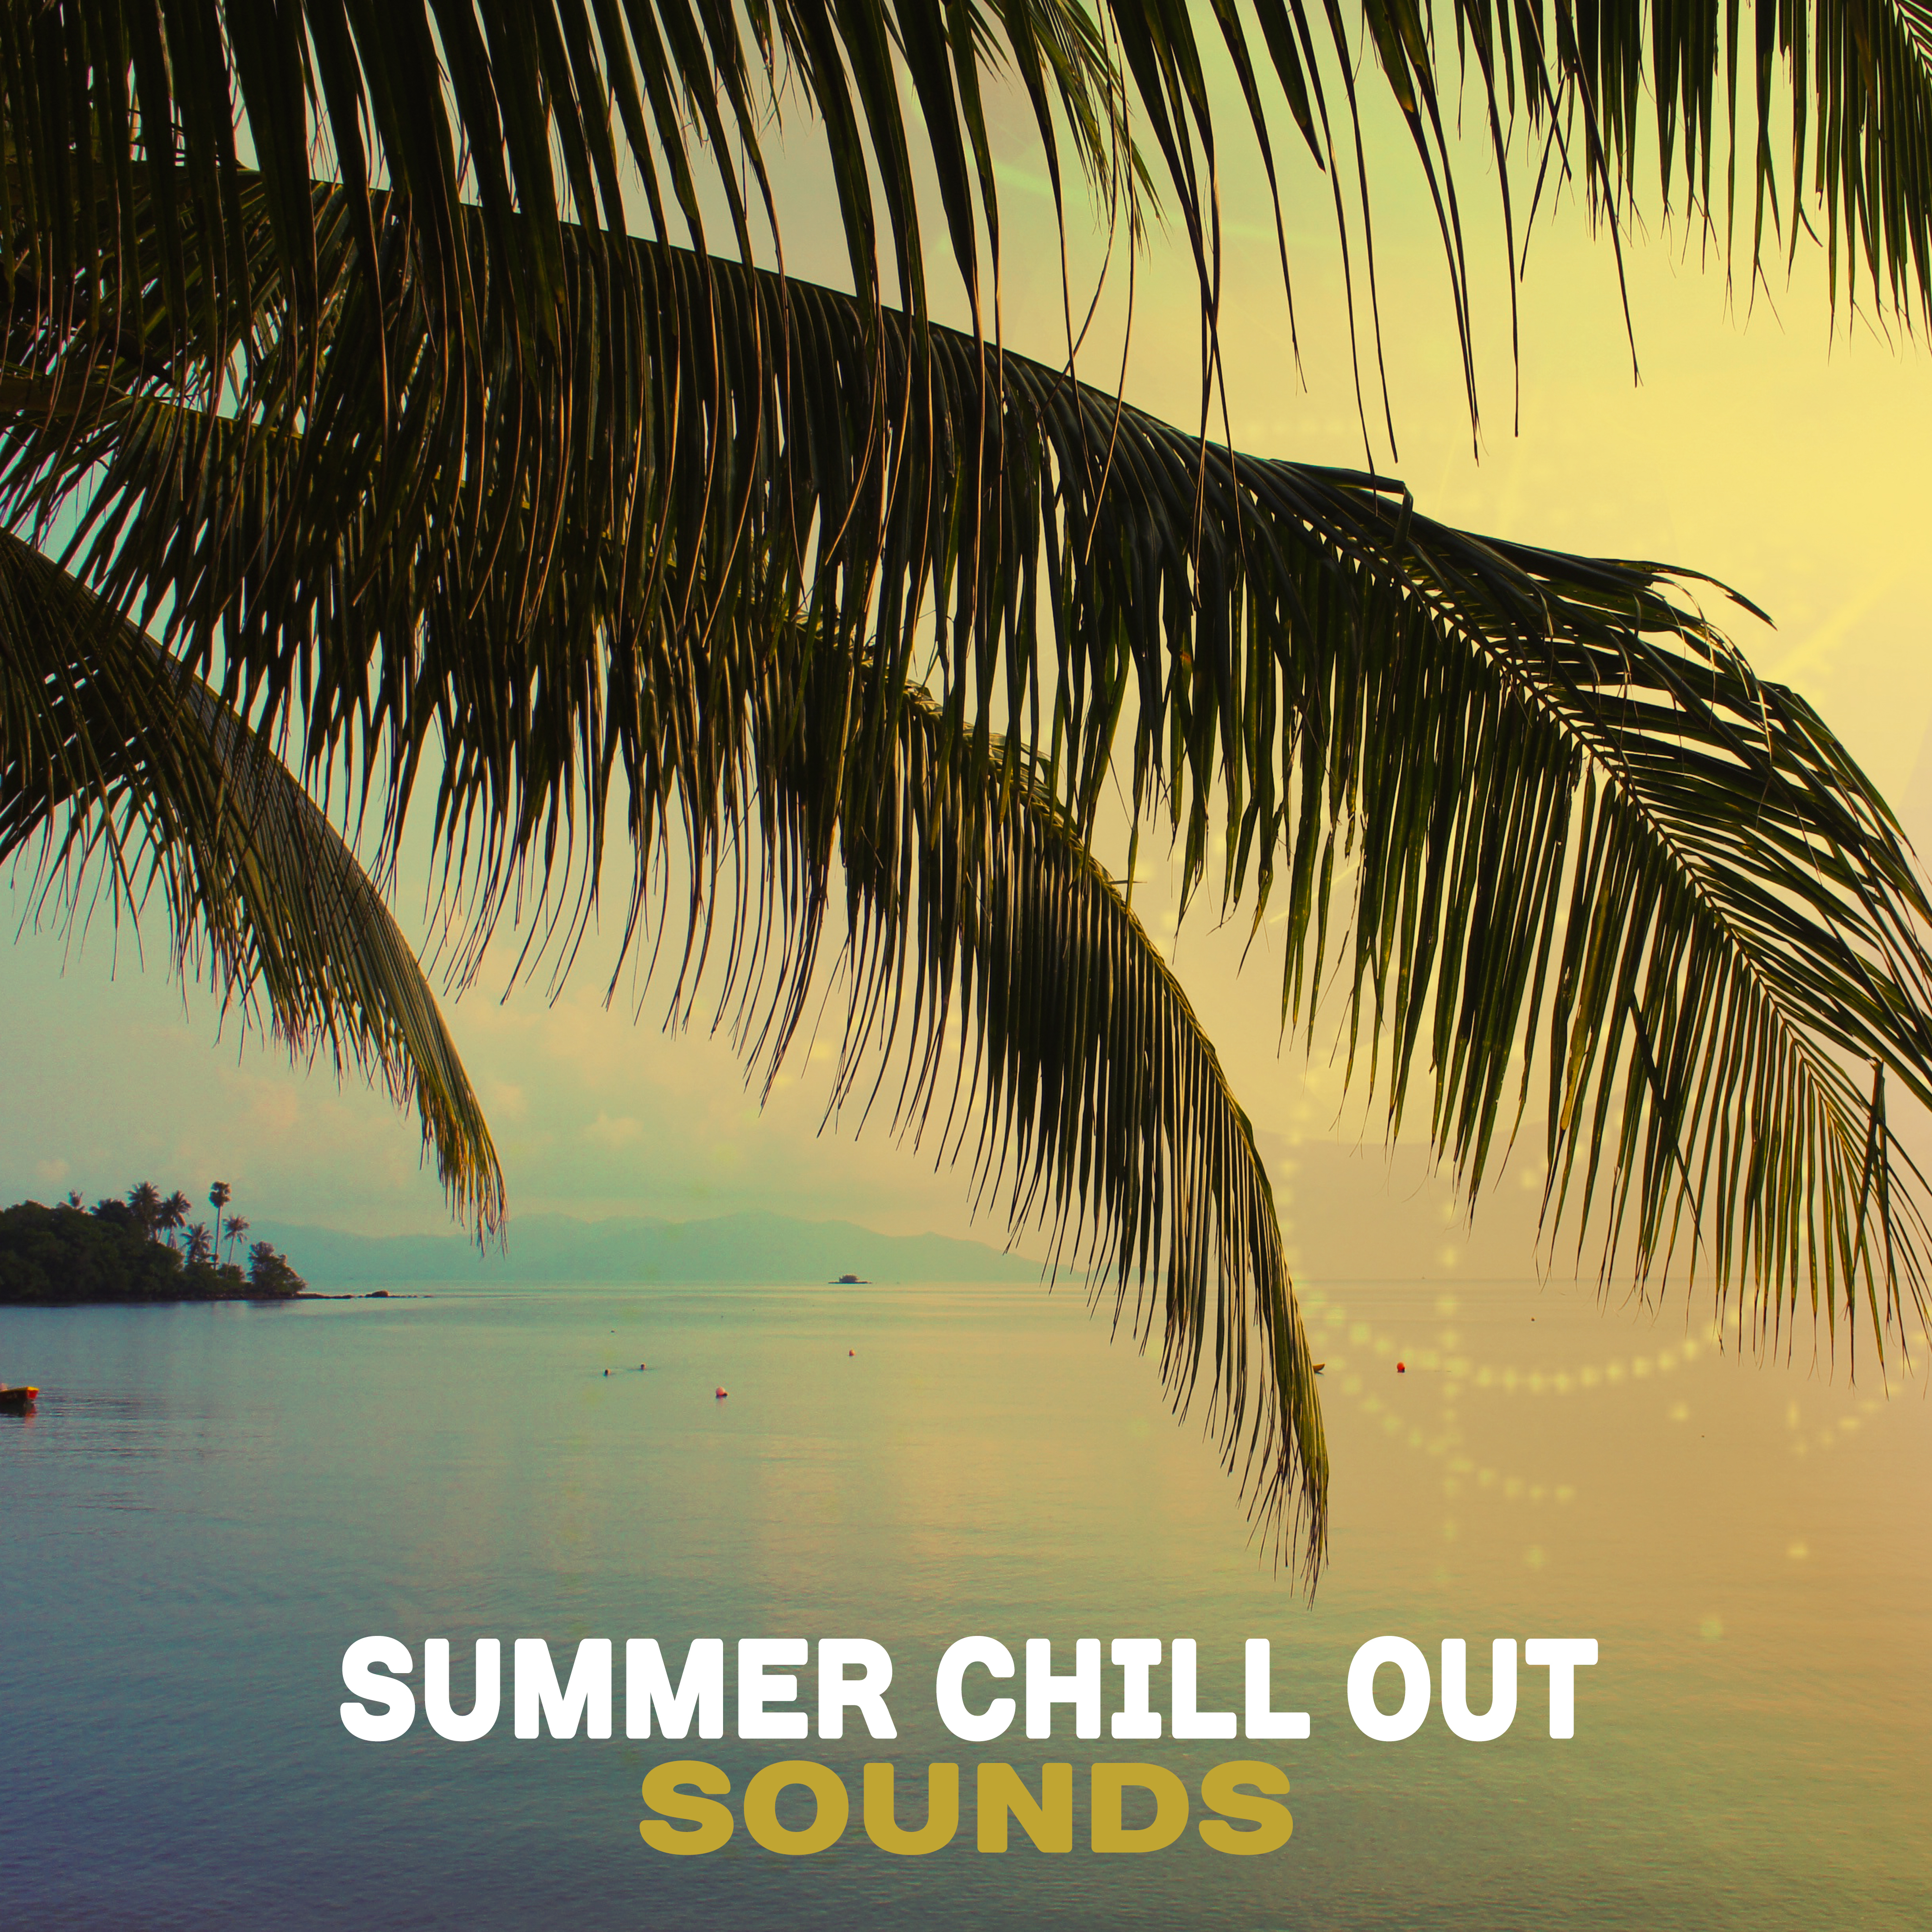 Summer Chill Out Sounds  Beach House Music, Sensual Sounds, Chill  Relax, Island Rest